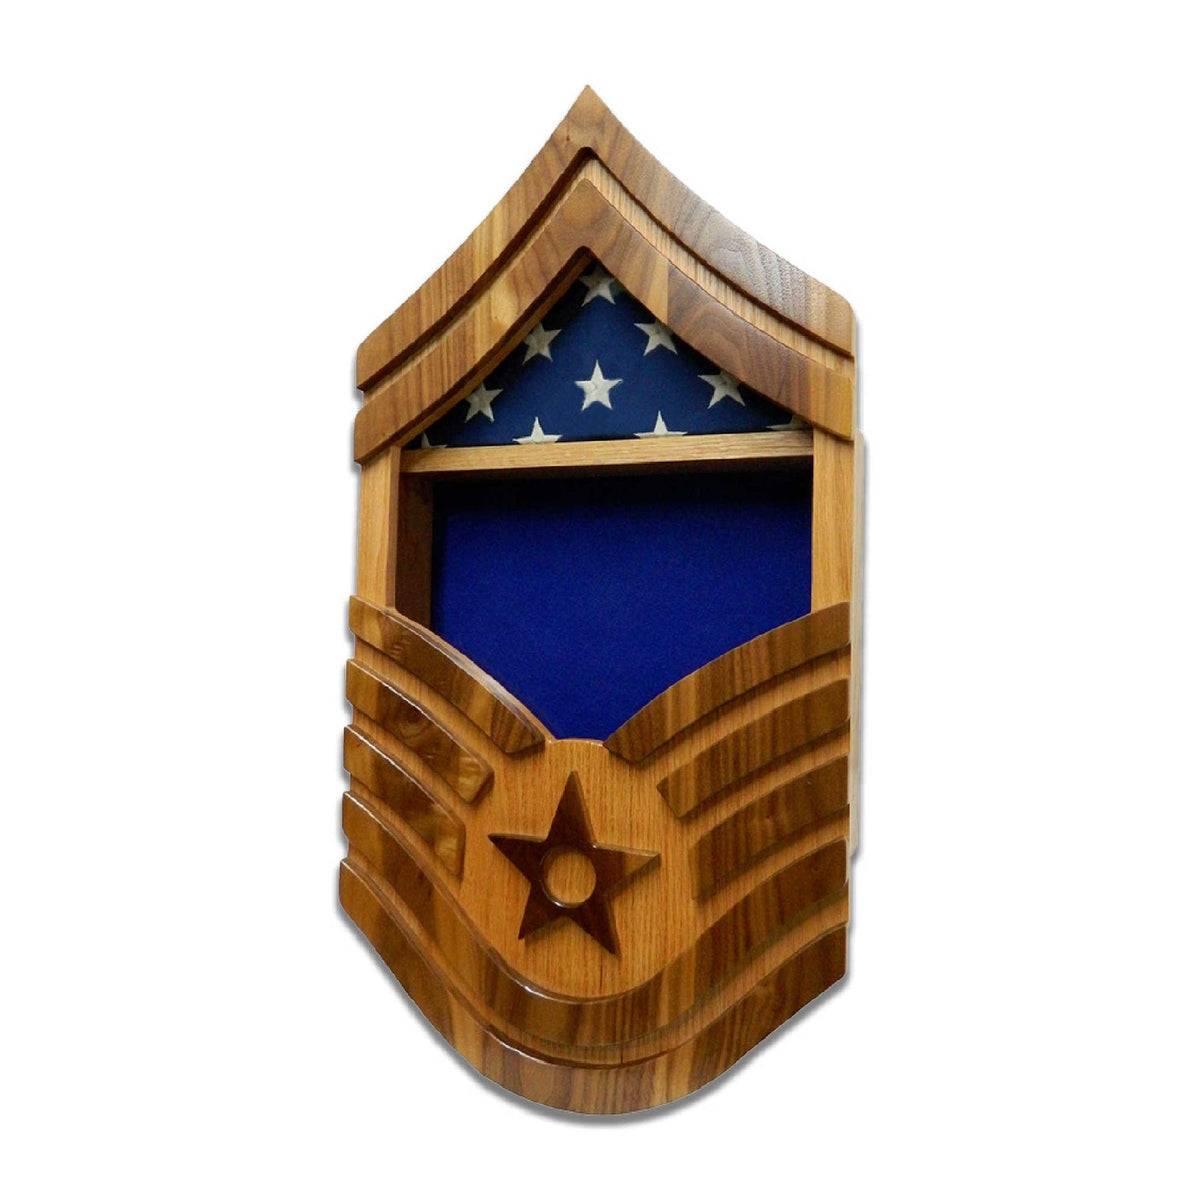 Military retirement shadow box for US Air Force Senior Master Sergeant. Made of real Oak and Walnut hardwood. Holds a 3'x5' folded flag. Shown with Blue felt option and 3'x5' folded flag.